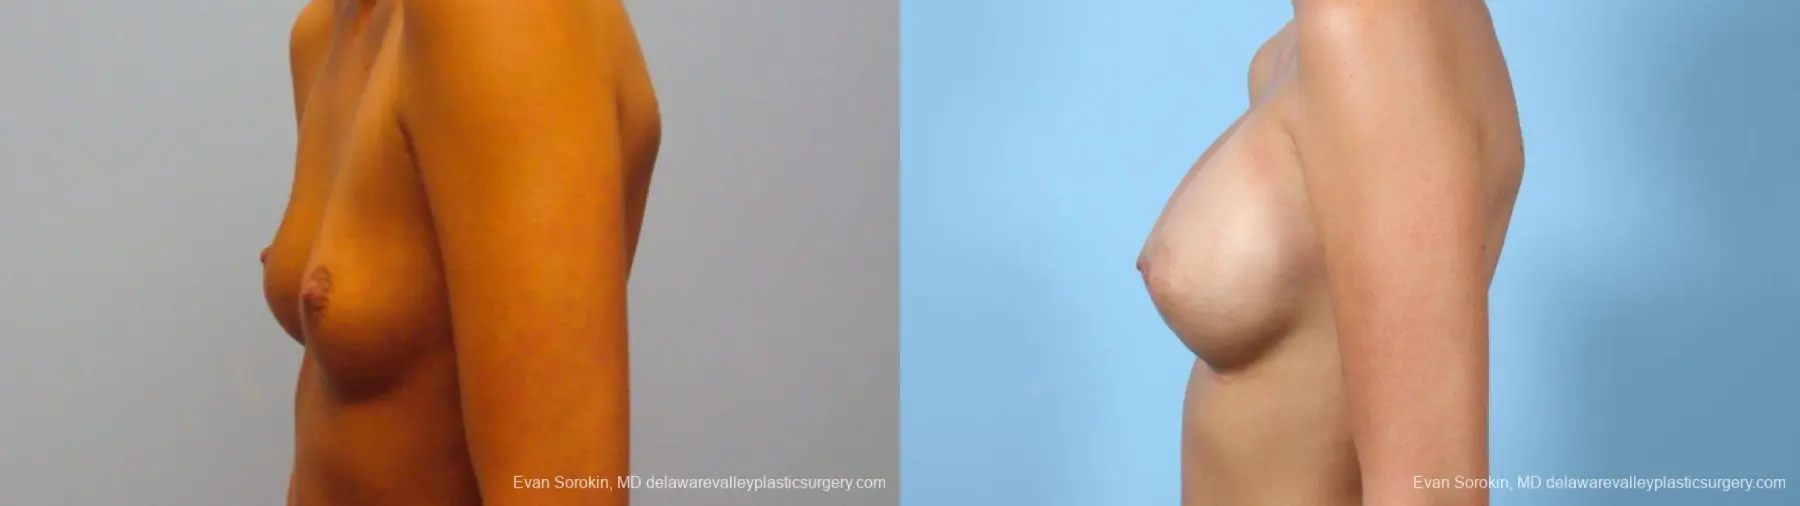 Philadelphia Breast Augmentation 9292 - Before and After 4